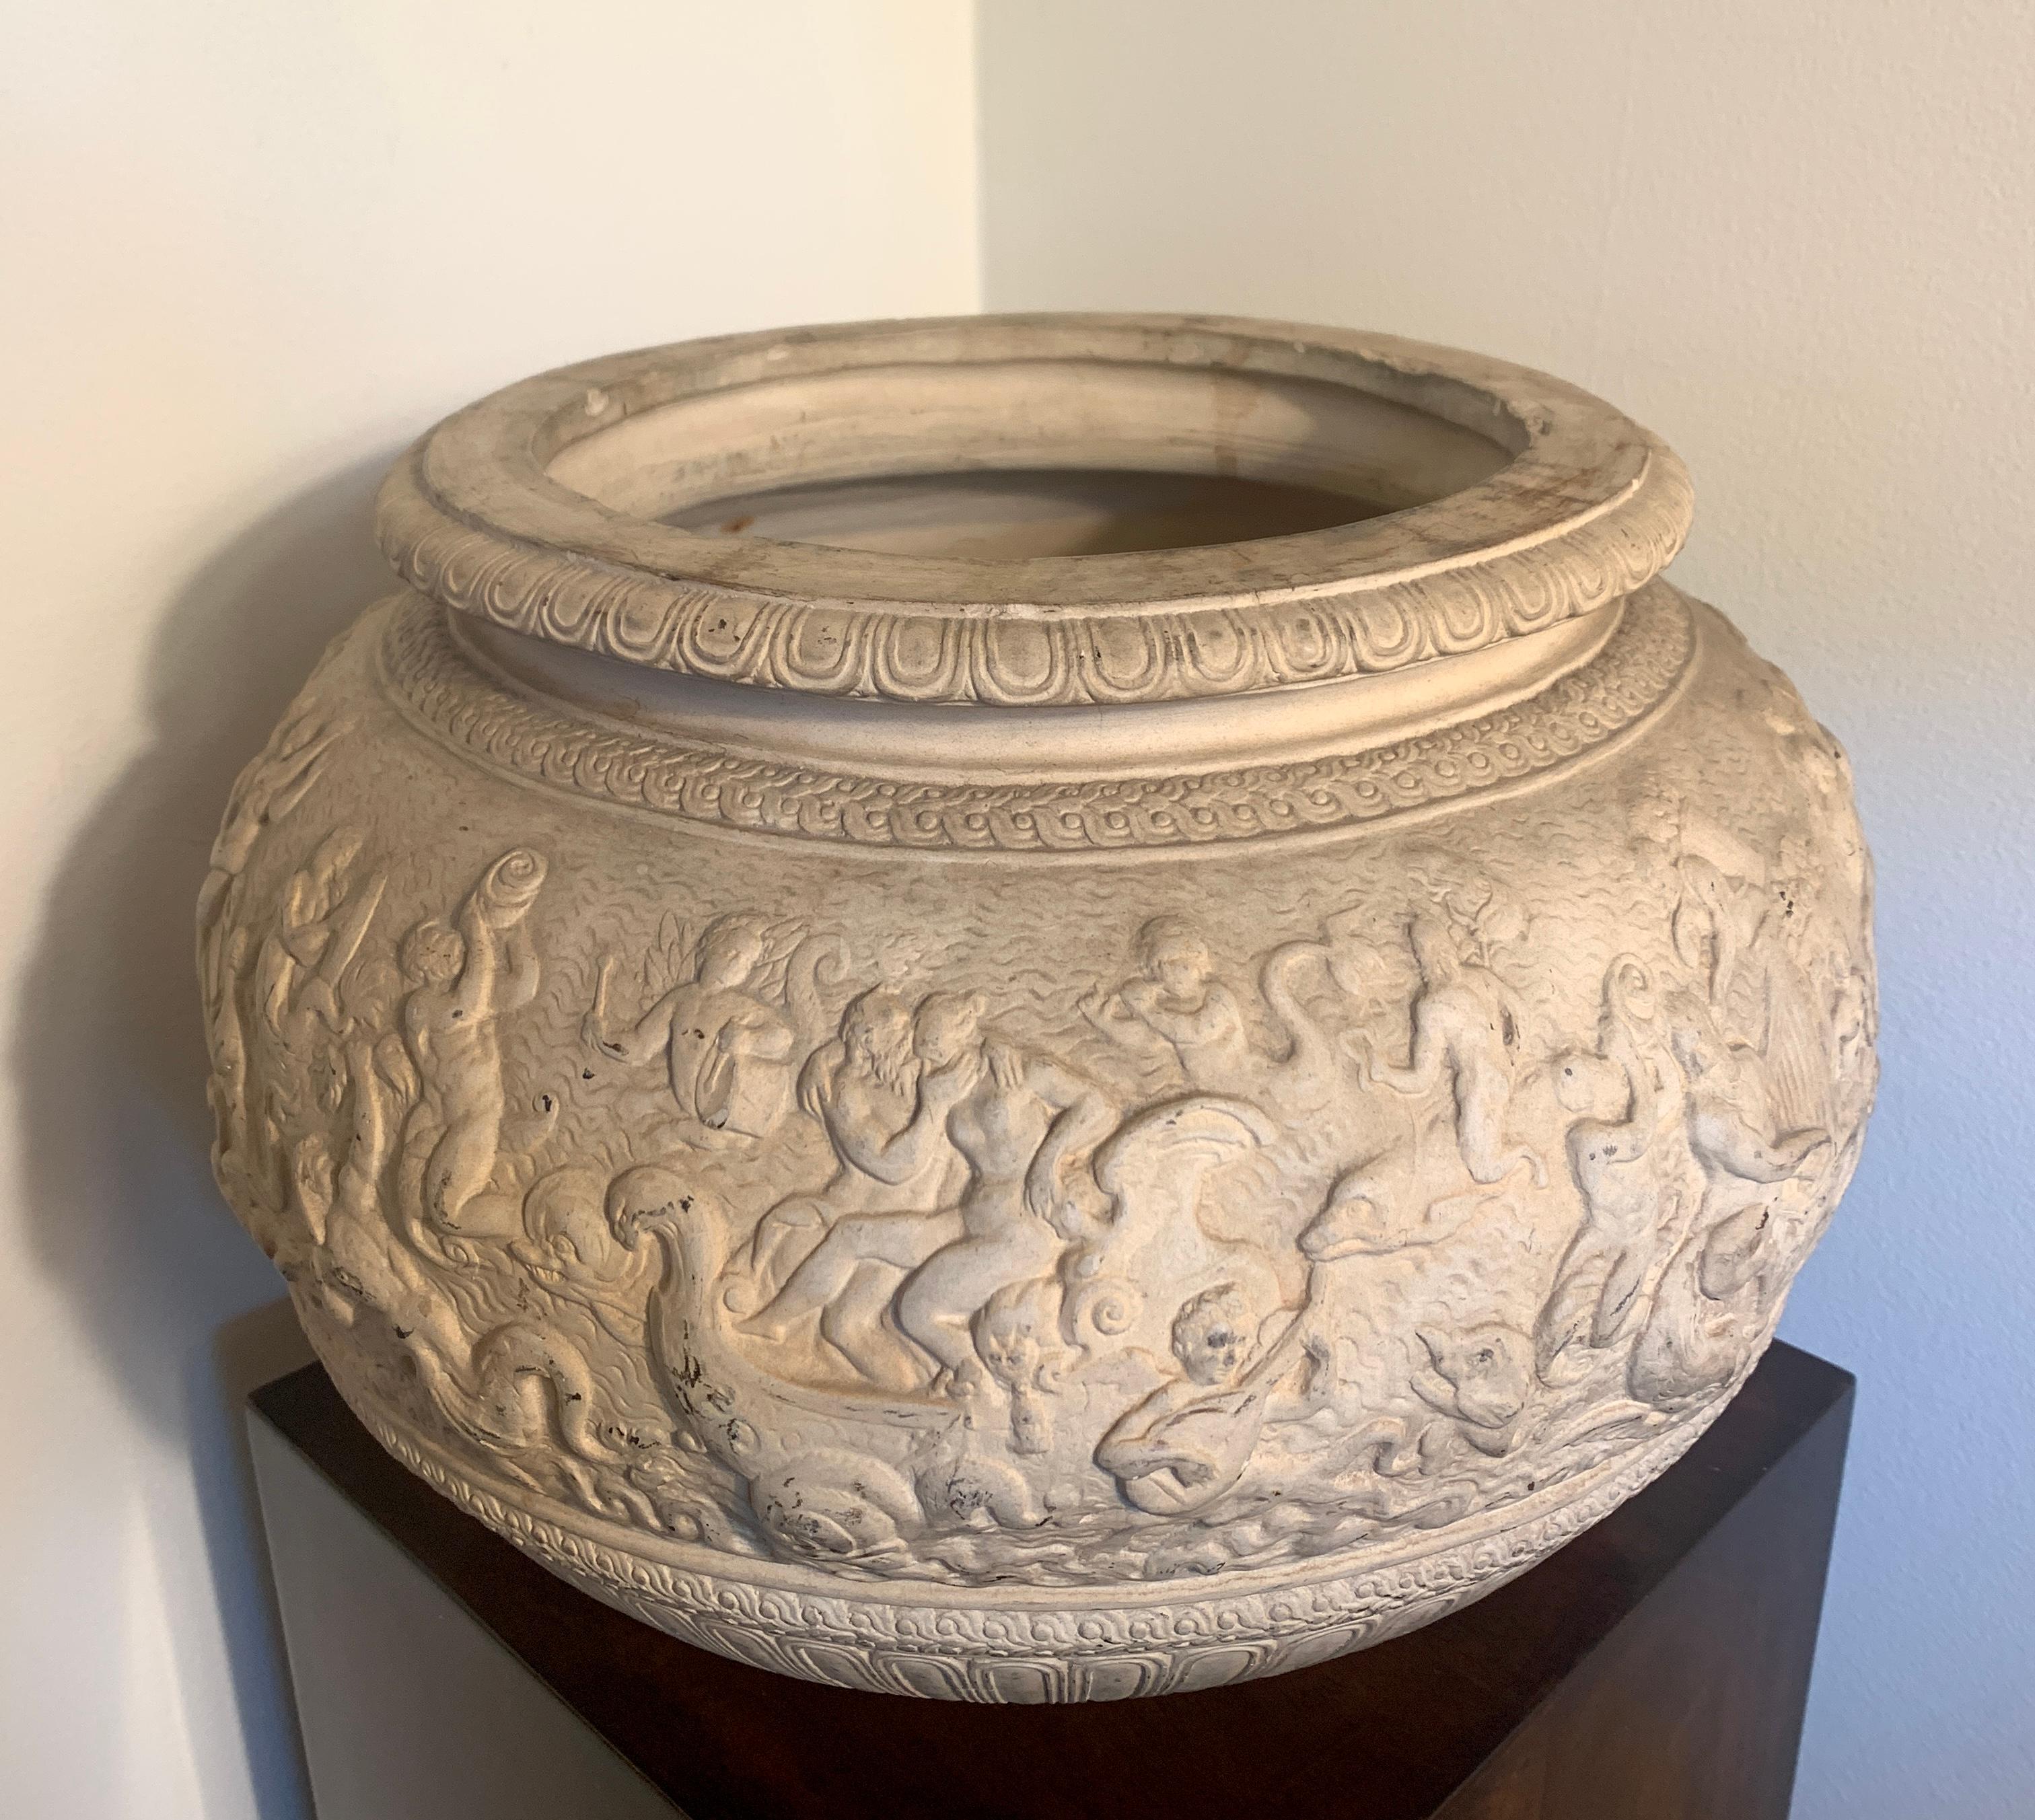 Beautifully detailed Dini e Cellai Signa Terracotta planter. Whimsical mythological scenes of Gods, Goddesses and frolicking putti playing music and dancing. Lovely patina, looks as beautiful empty as it does when filled with flowers or a grouping